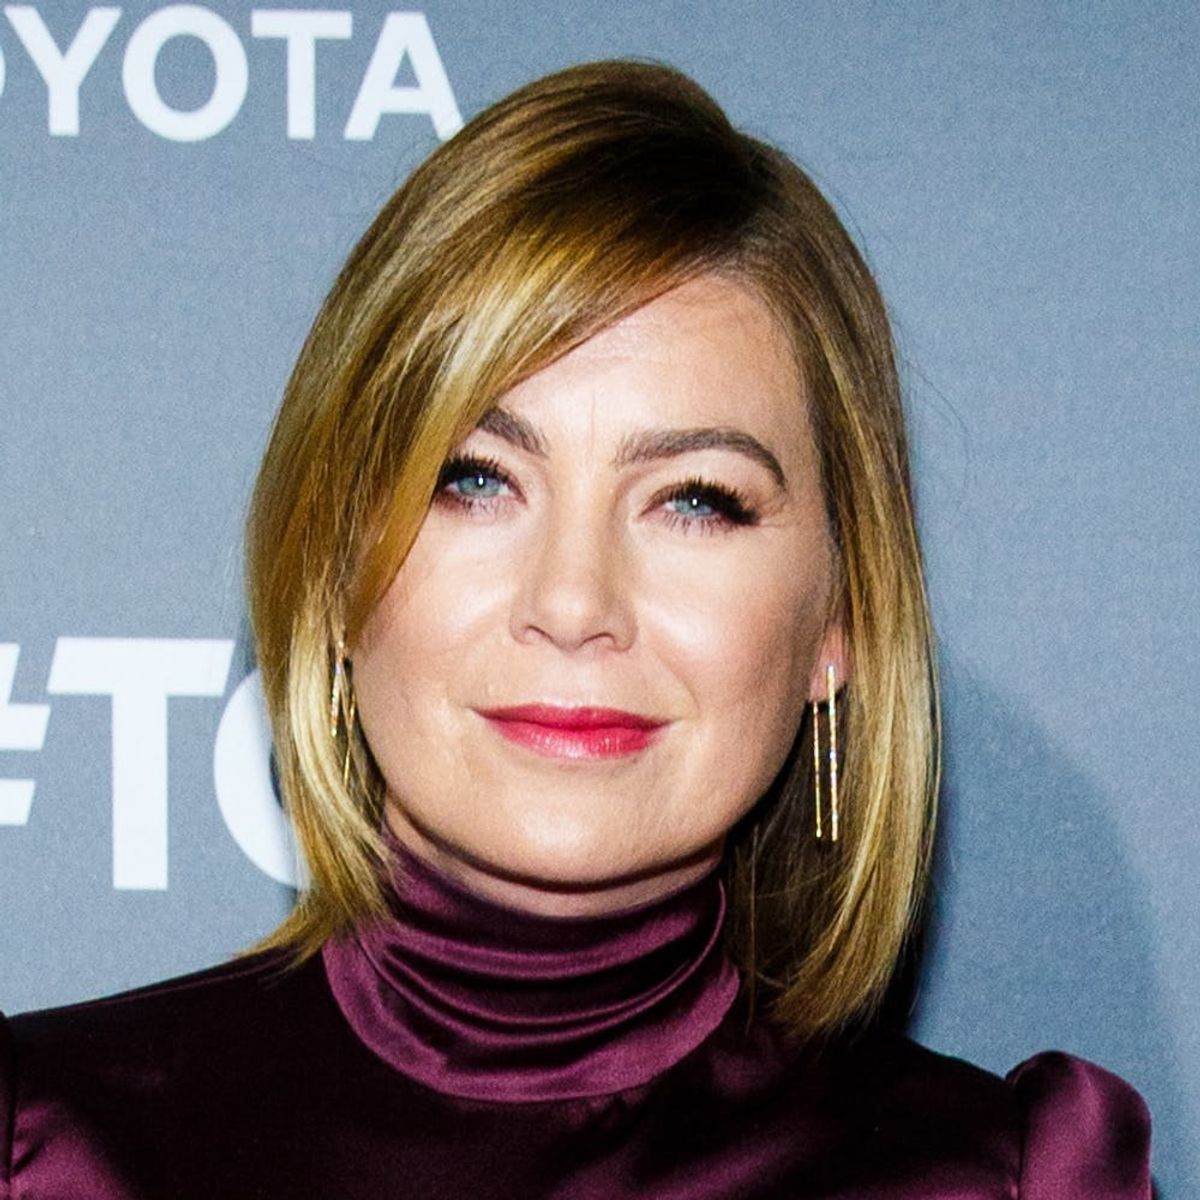 Ellen Pompeo Announces Her Baby’s Name With a Heartwarming Pic